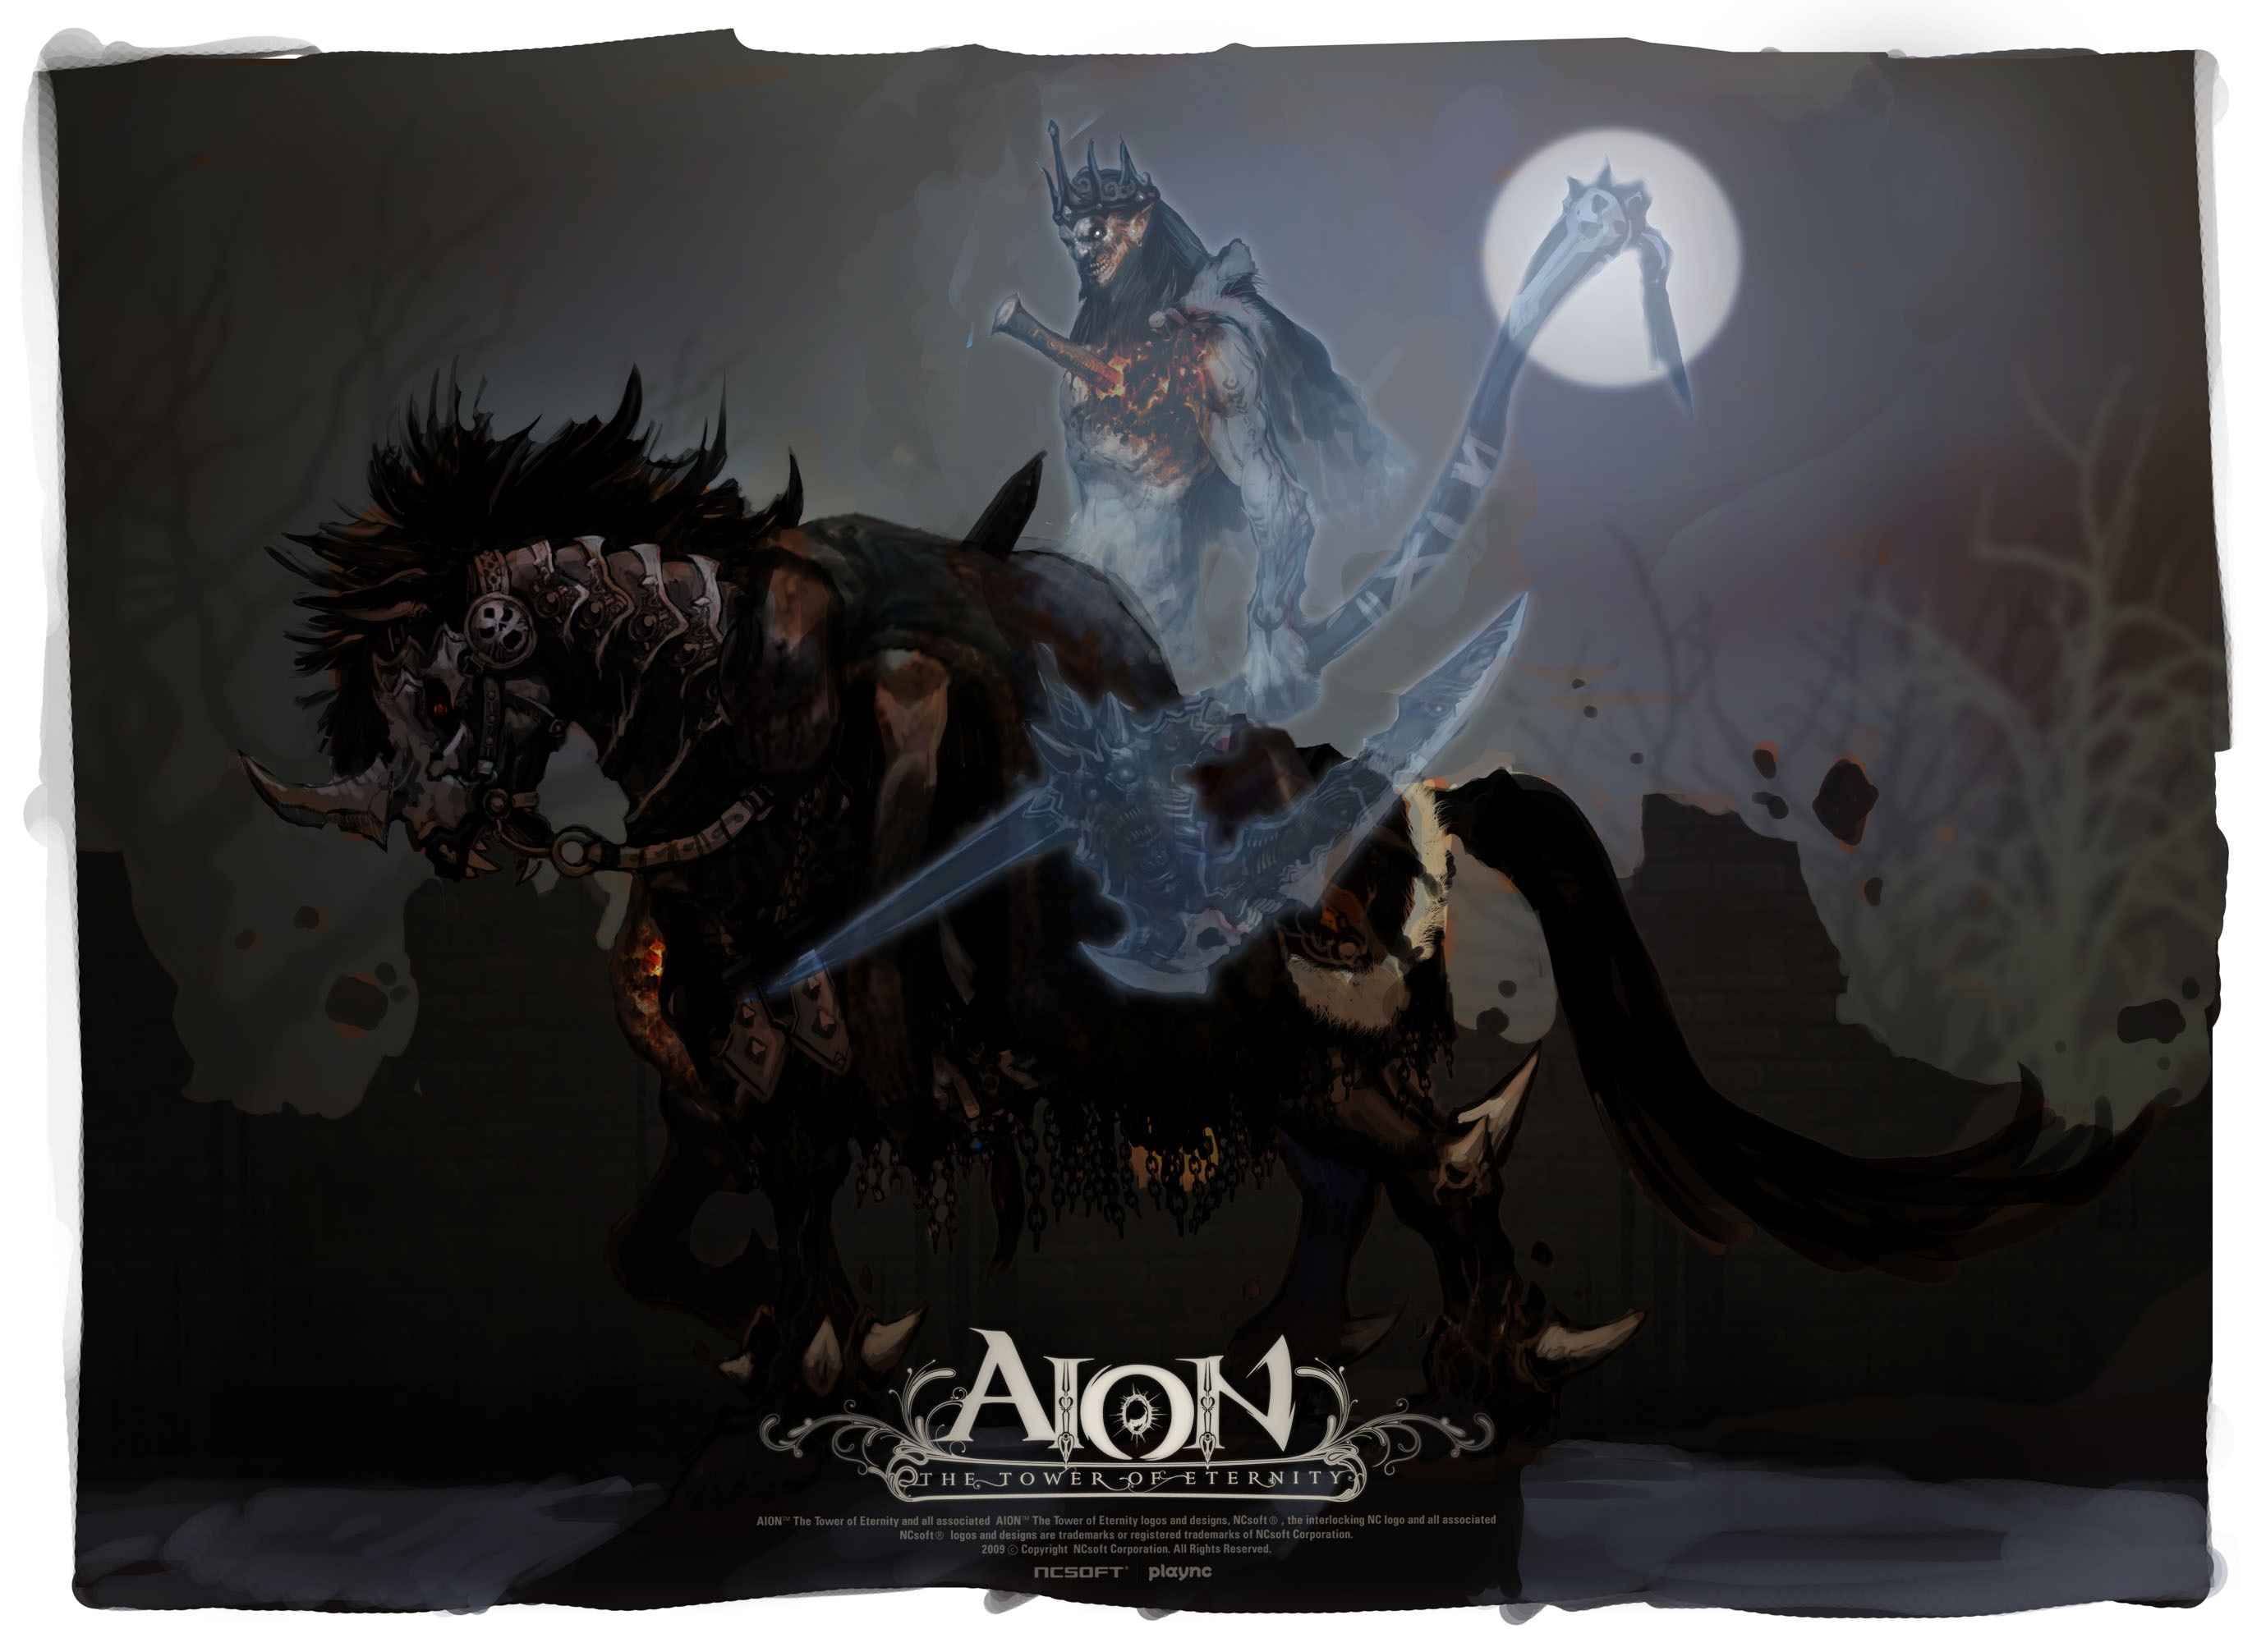 video game, aion: tower of eternity, aion, game, ghost, horse, tower of eternity, warrior